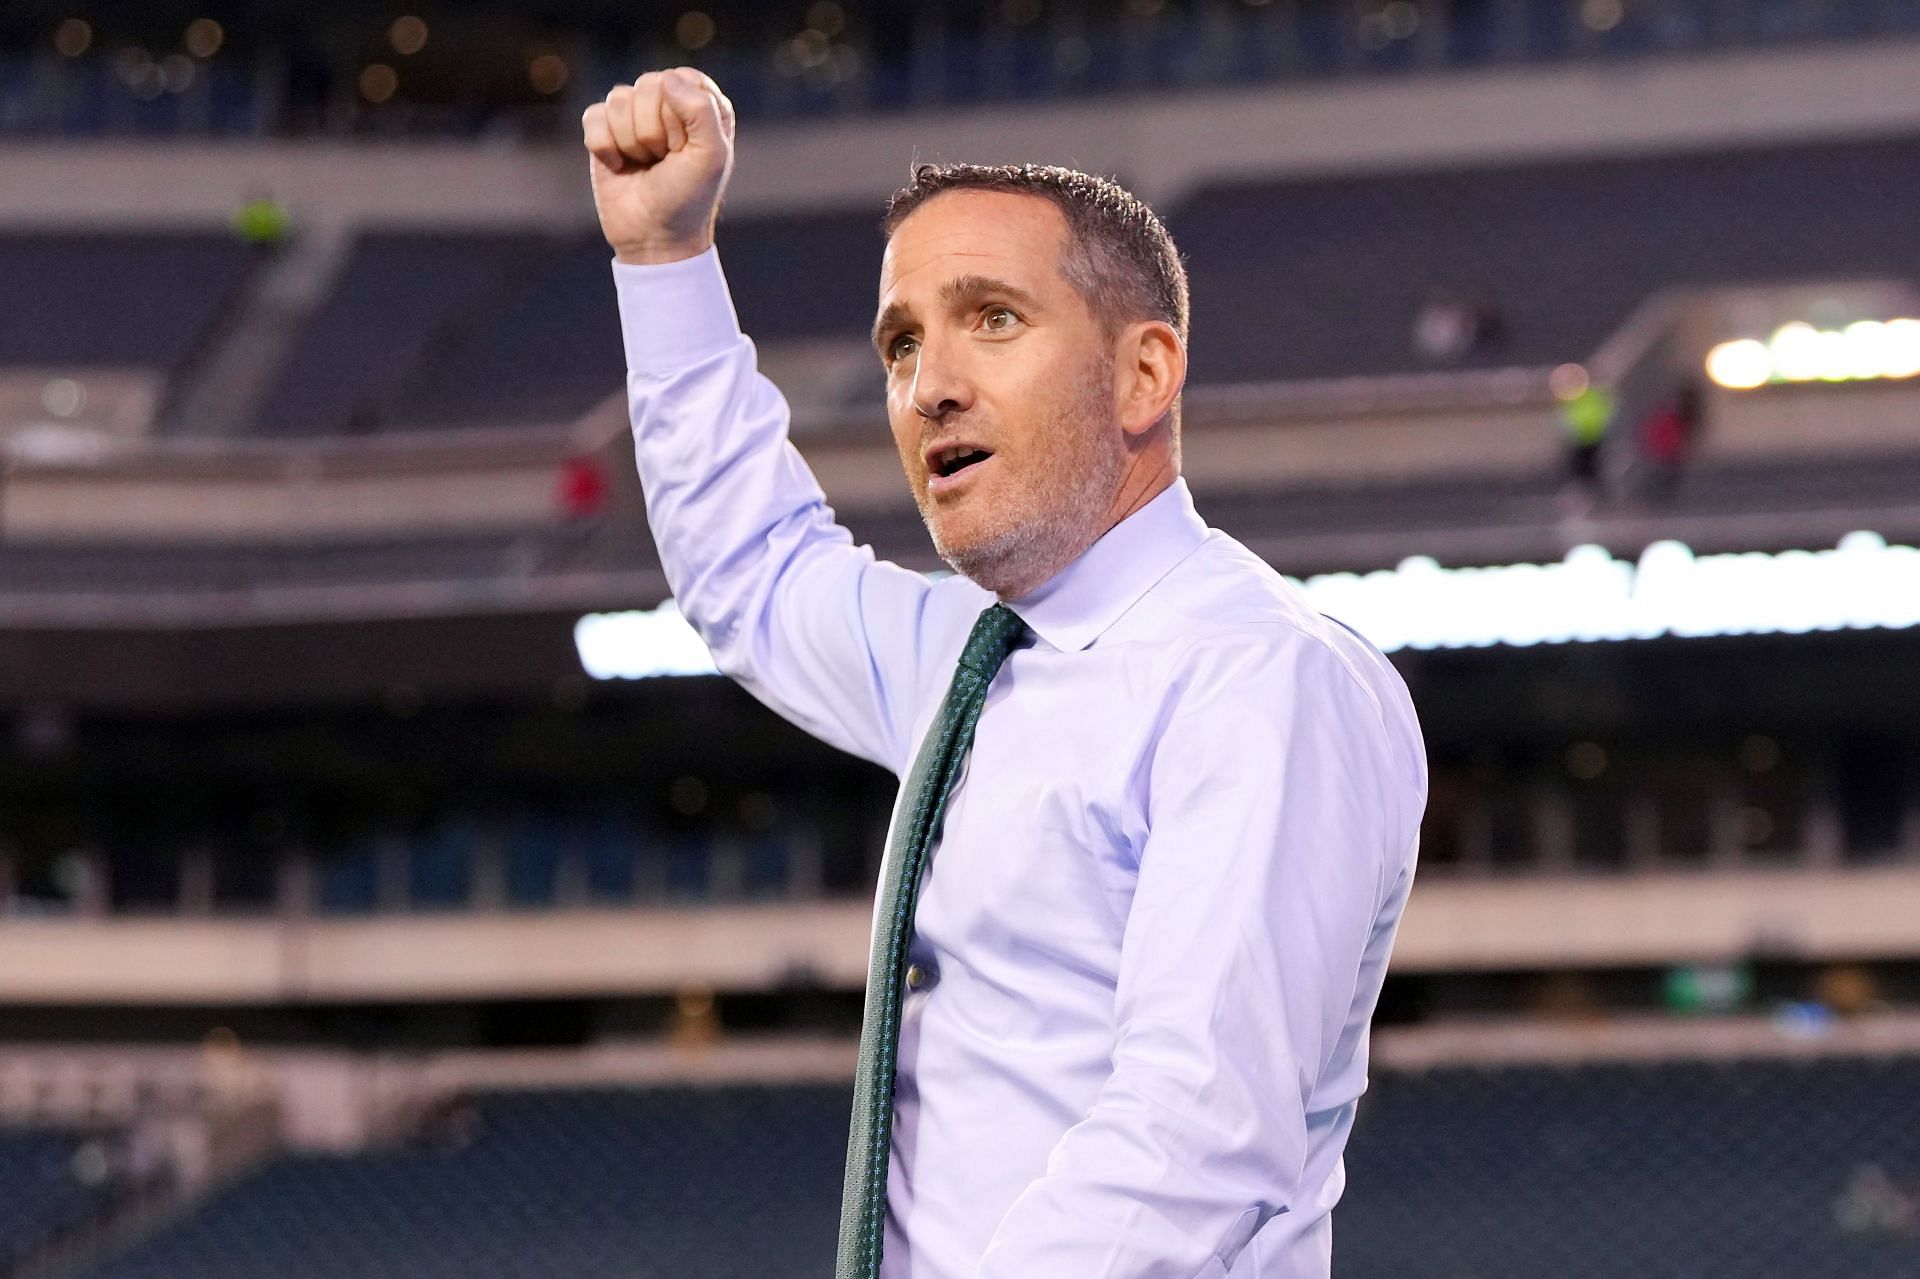 Howie Roseman may have just given the Philadelphia Eagles the first 17-0 squad in NFL history